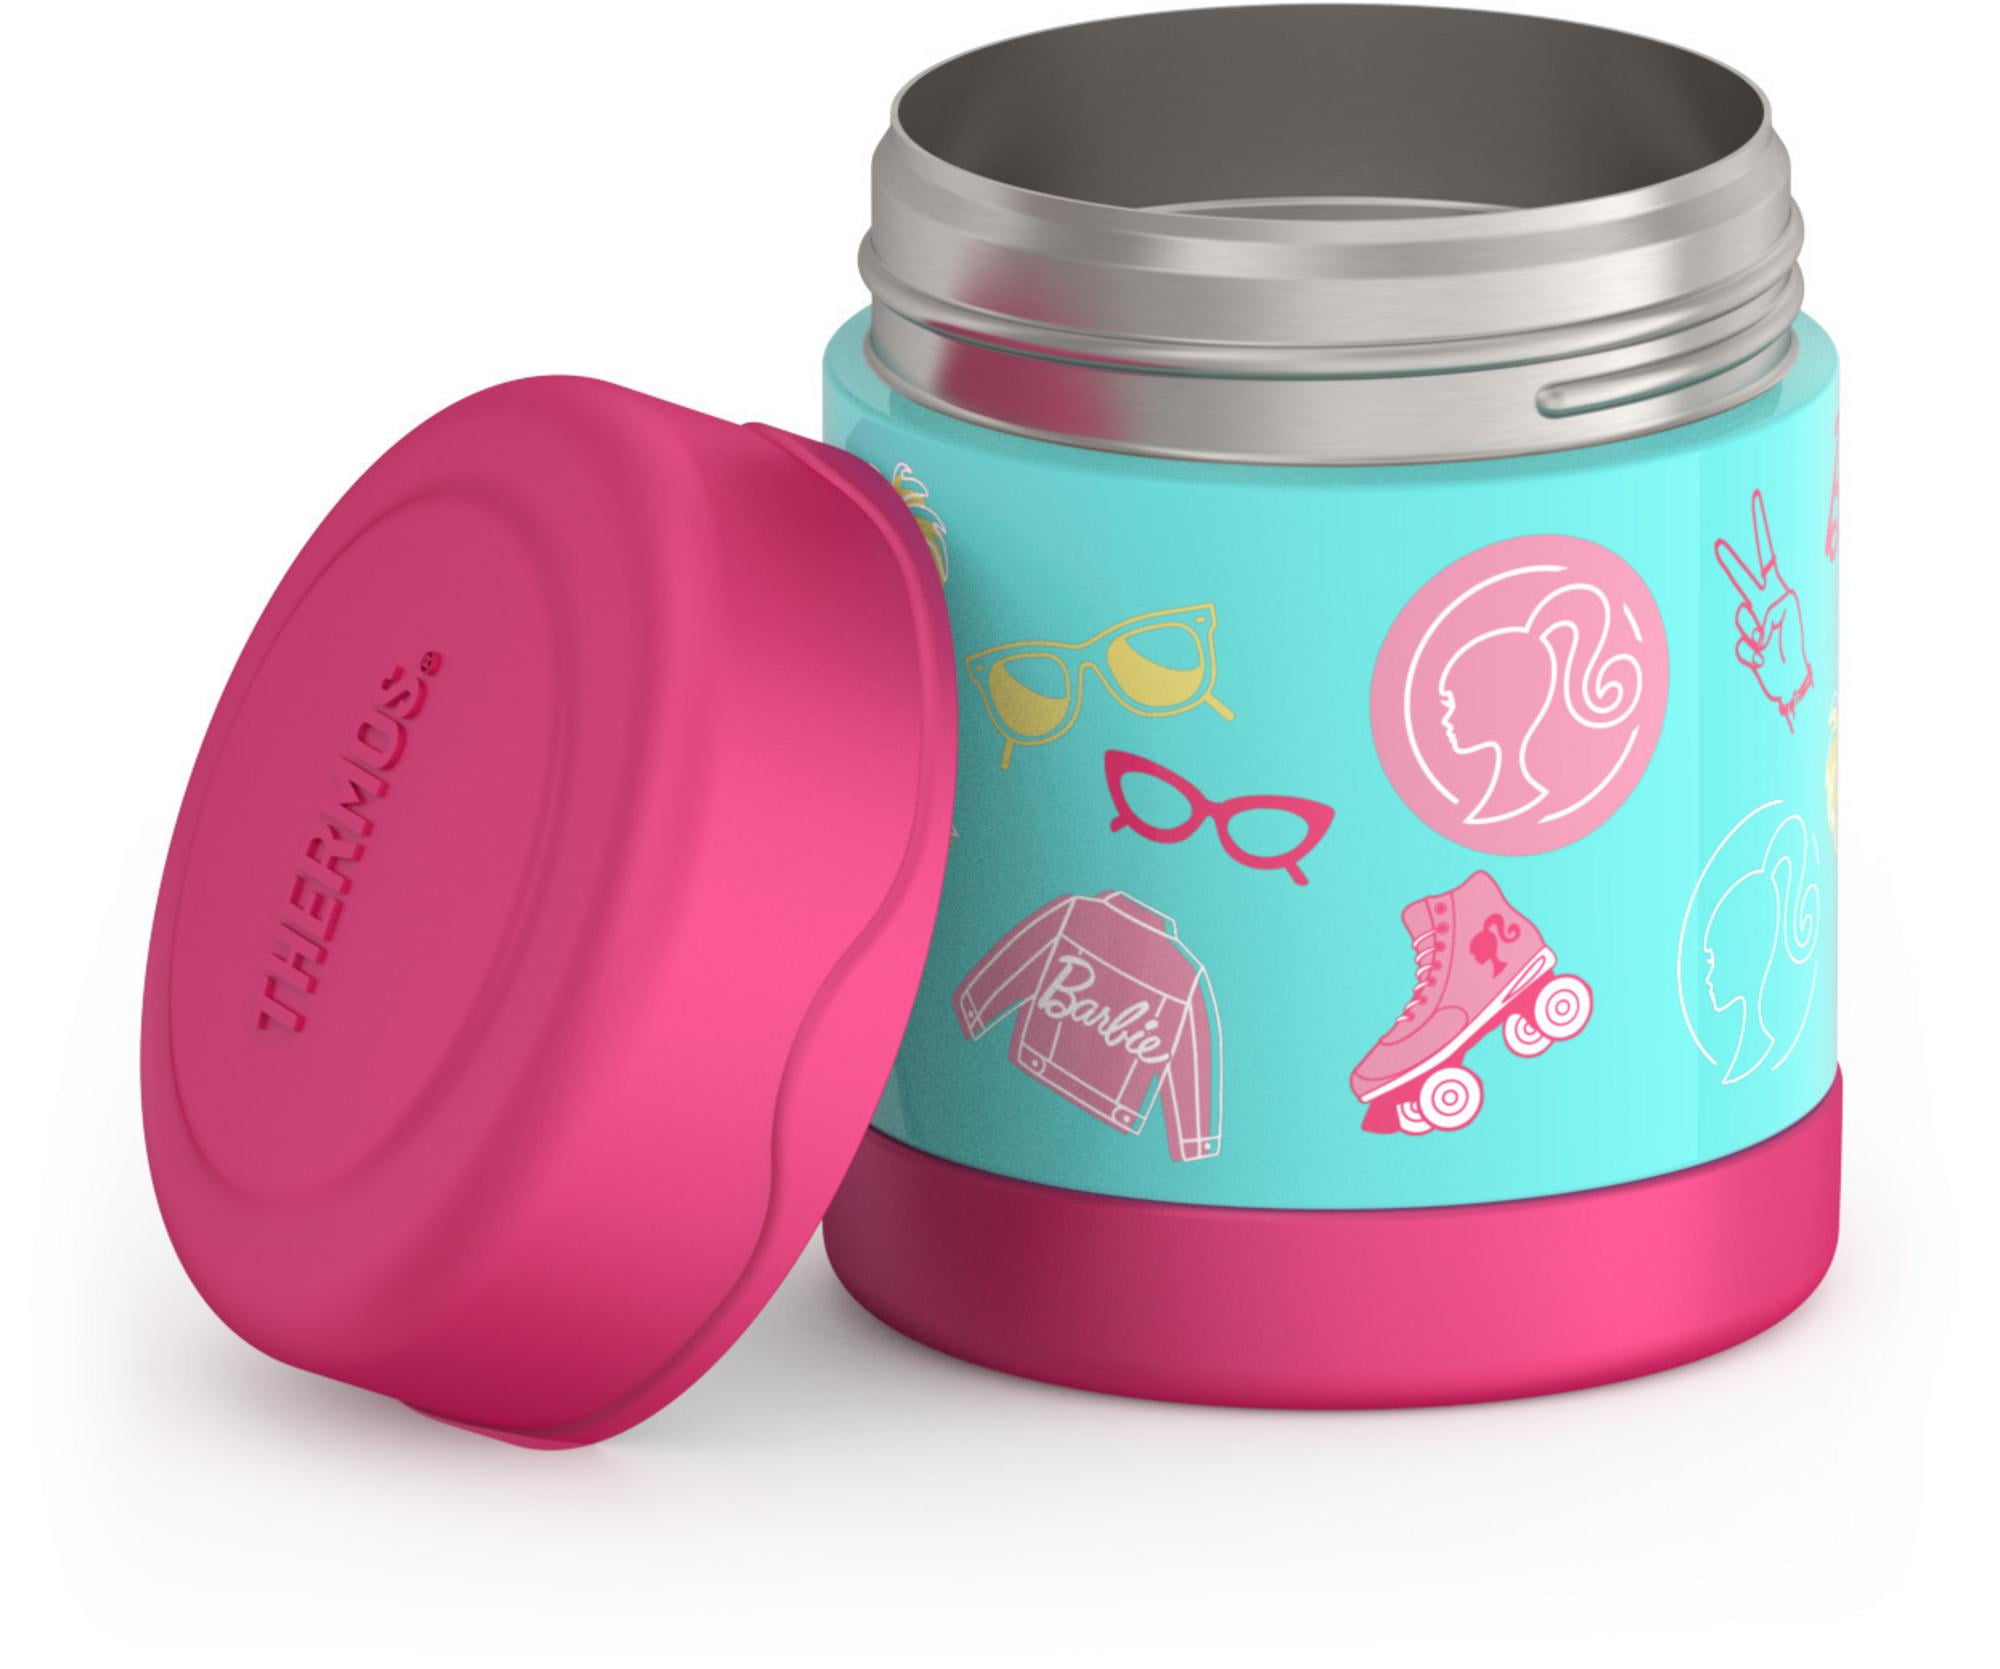  THERMOS Licensed Soft Lunch Kit, Barbie: Home & Kitchen